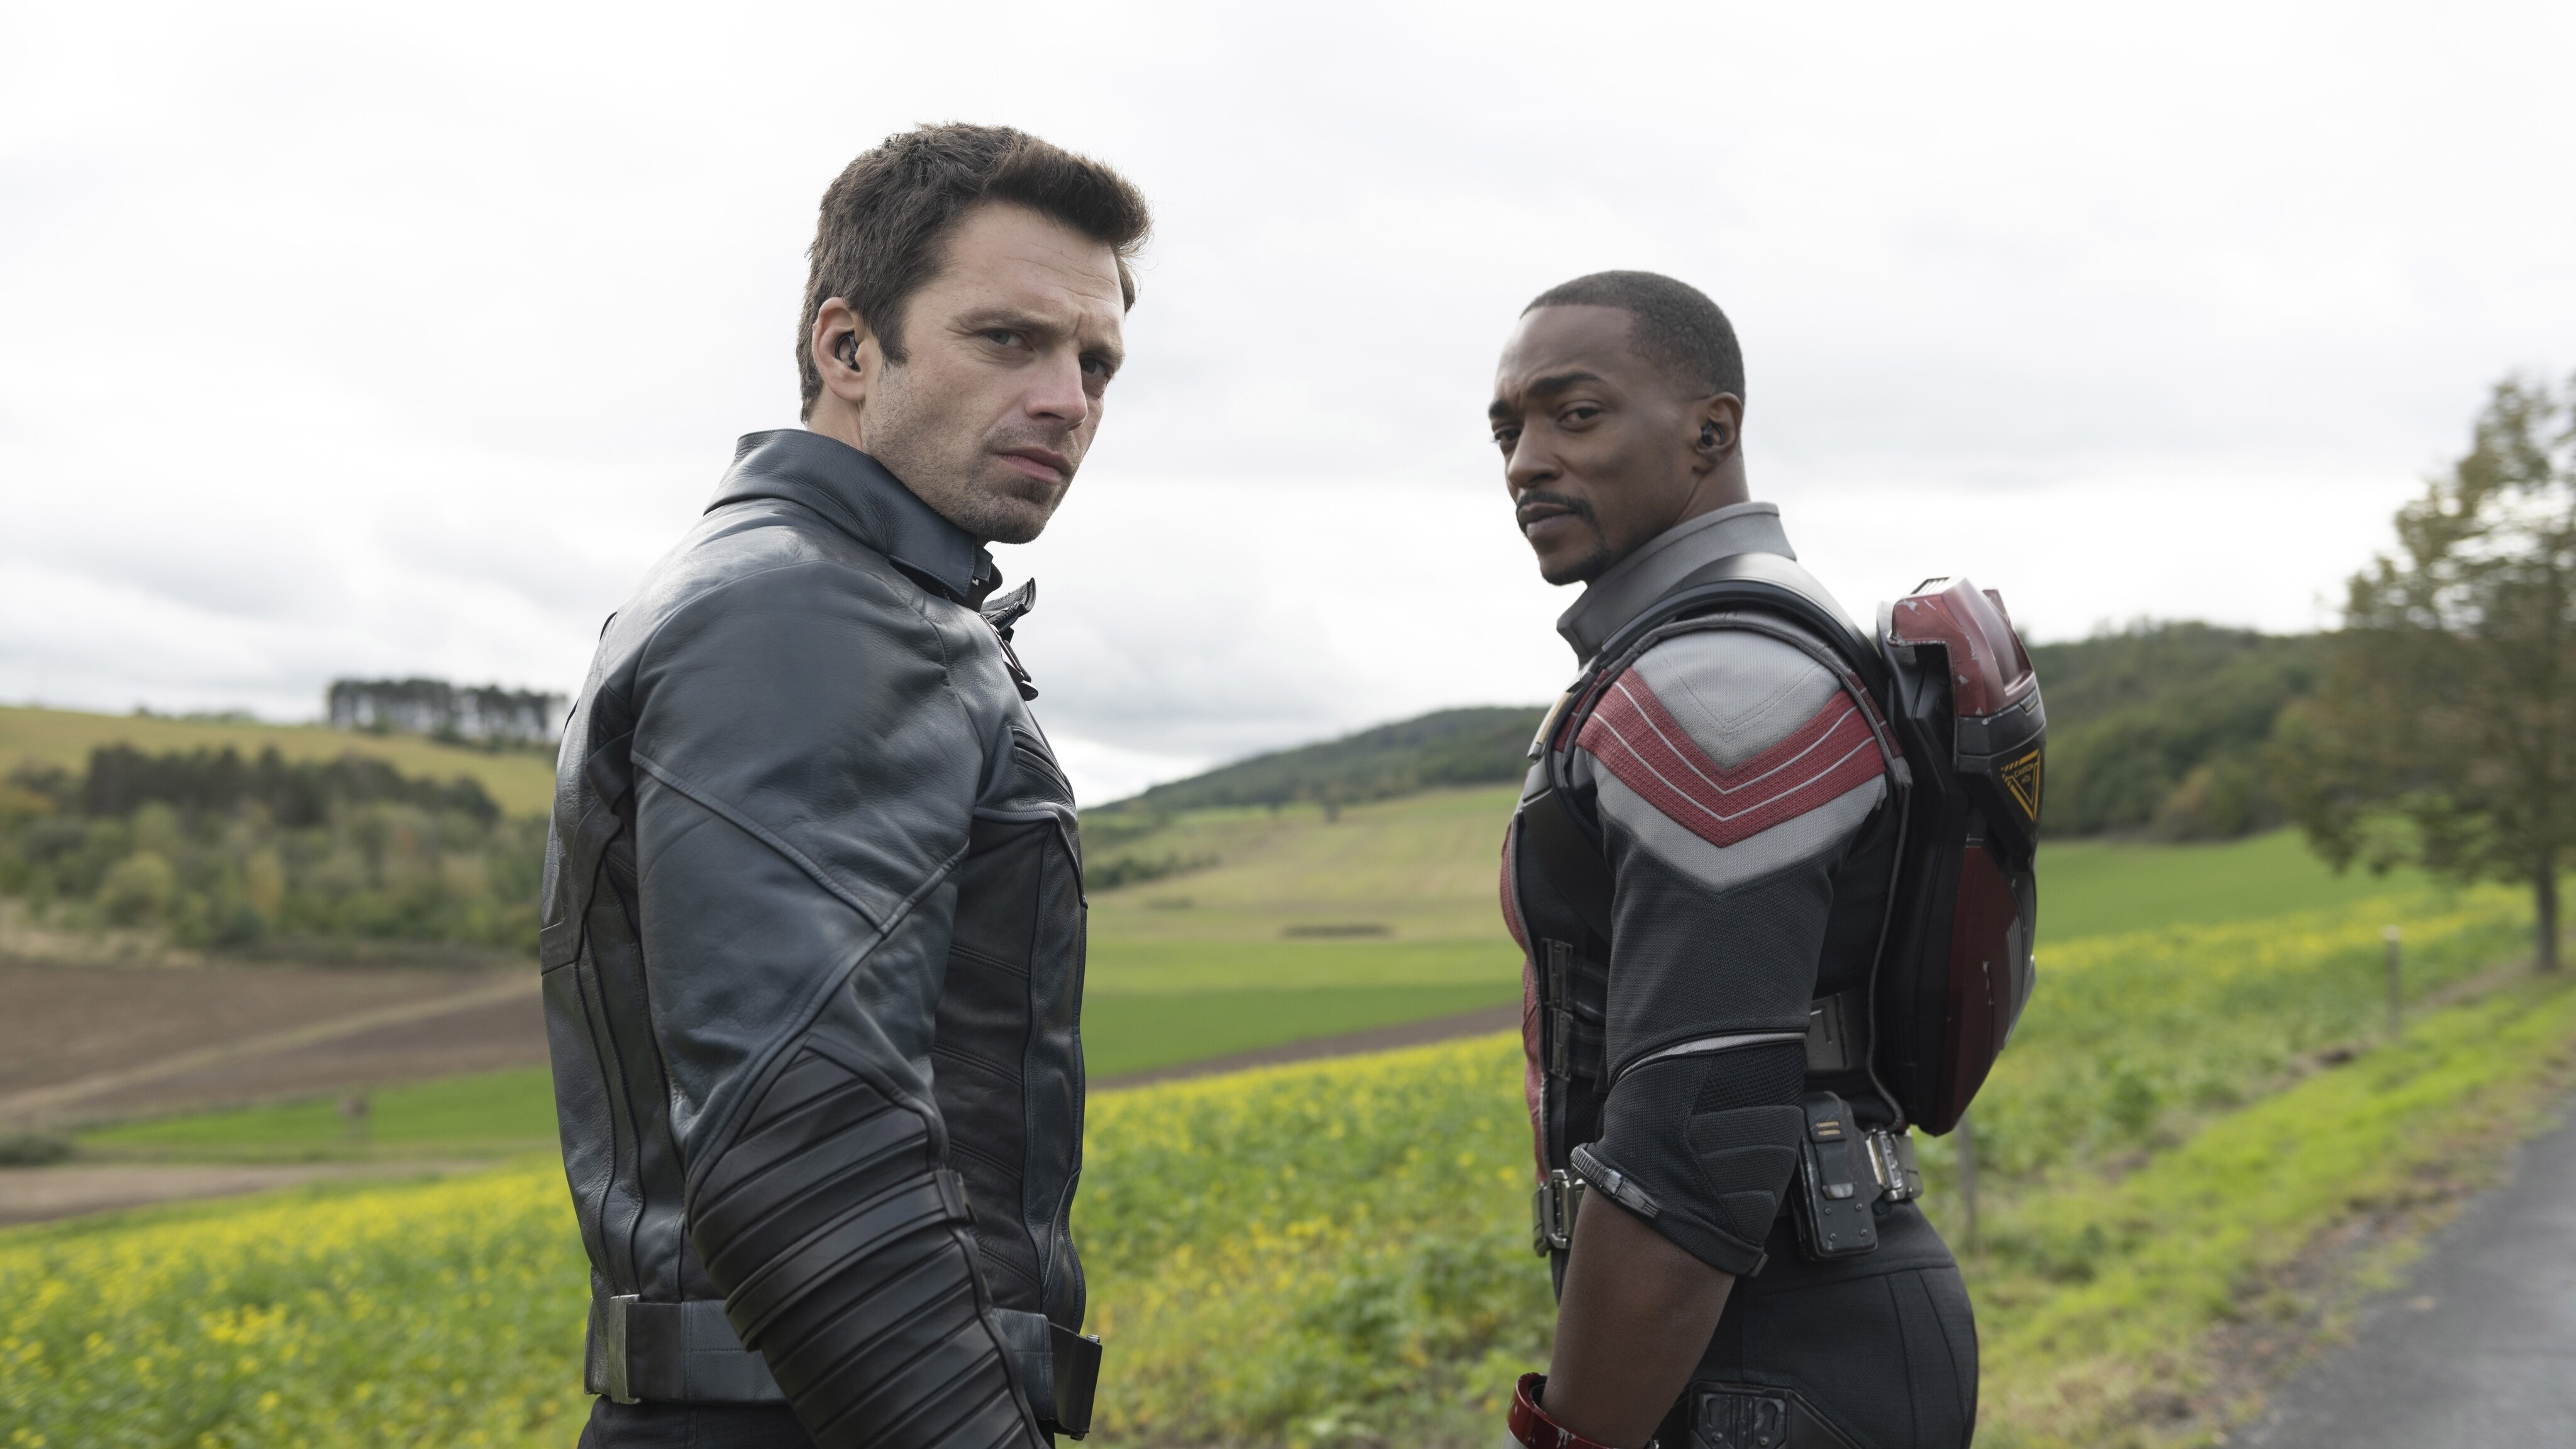 (L-R): Winter Soldier/Bucky Barnes (Sebastian Stan) and Falcon/Sam Wilson (Anthony Mackie) in Marvel Studios' THE FALCON AND THE WINTER SOLDIER exclusively on Disney+. Photo by Julie Vrabelová. ©Marvel Studios 2021. All Rights Reserved.